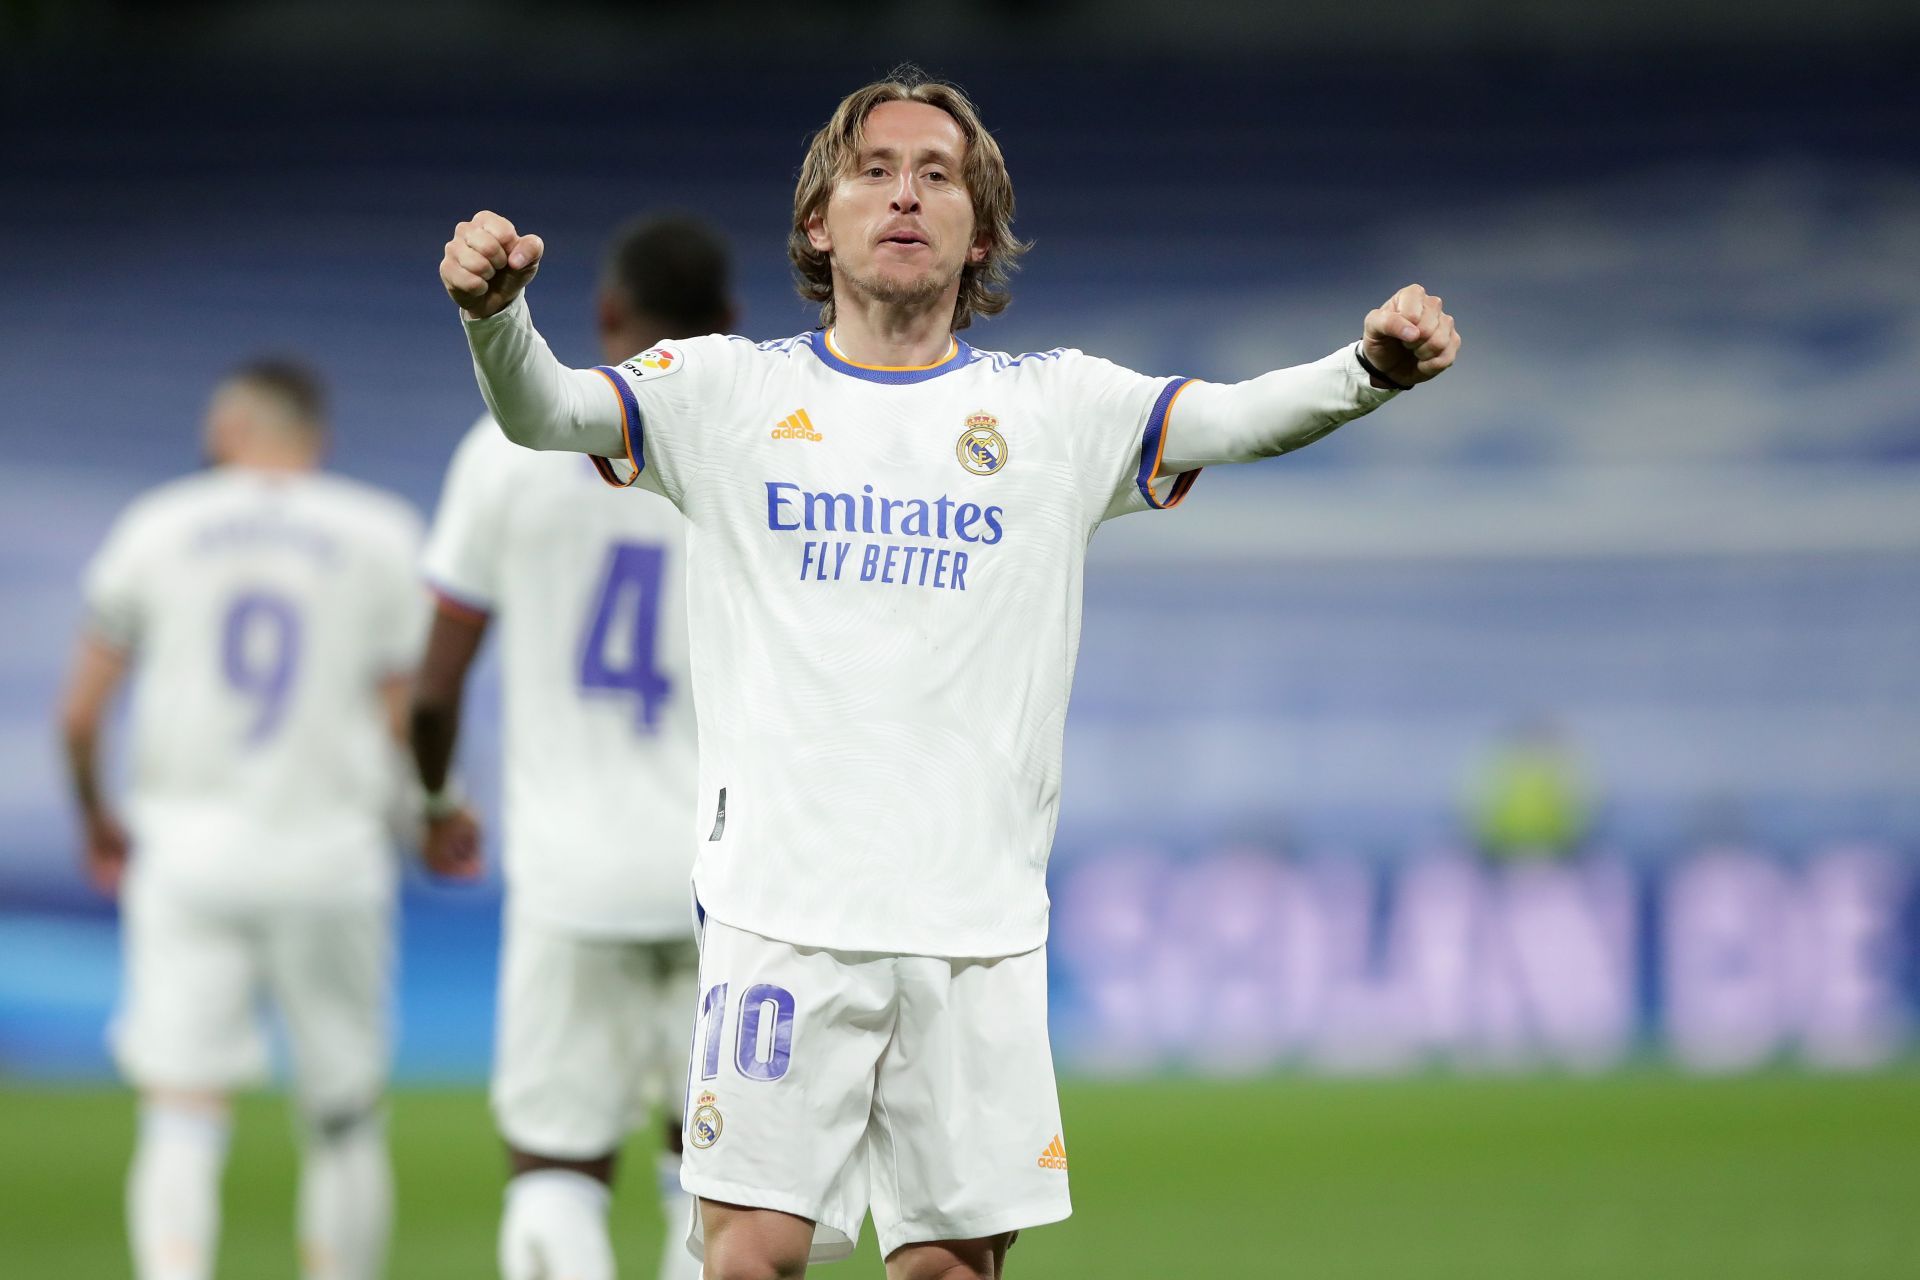 Luka Modric has maintained 92.6% pass accuracy in the Champions League